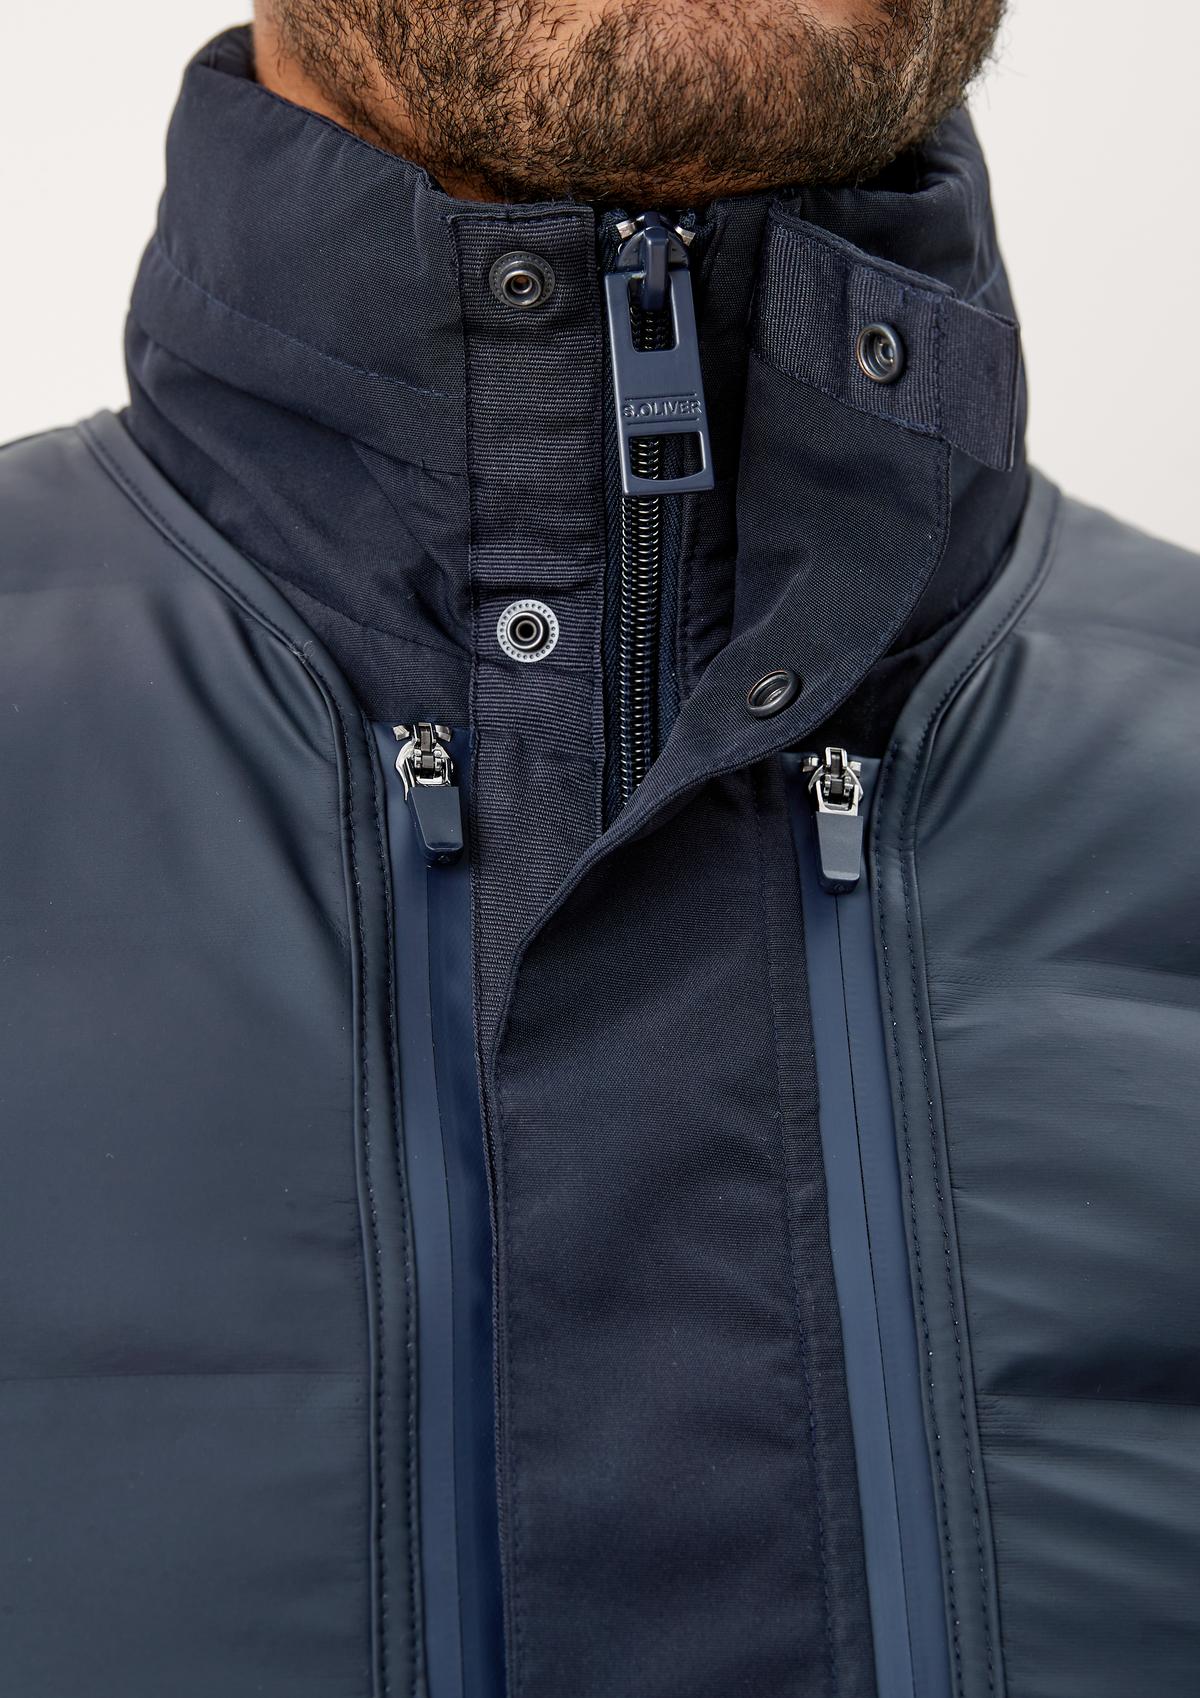 s.Oliver Jacket with a detachable body warmer